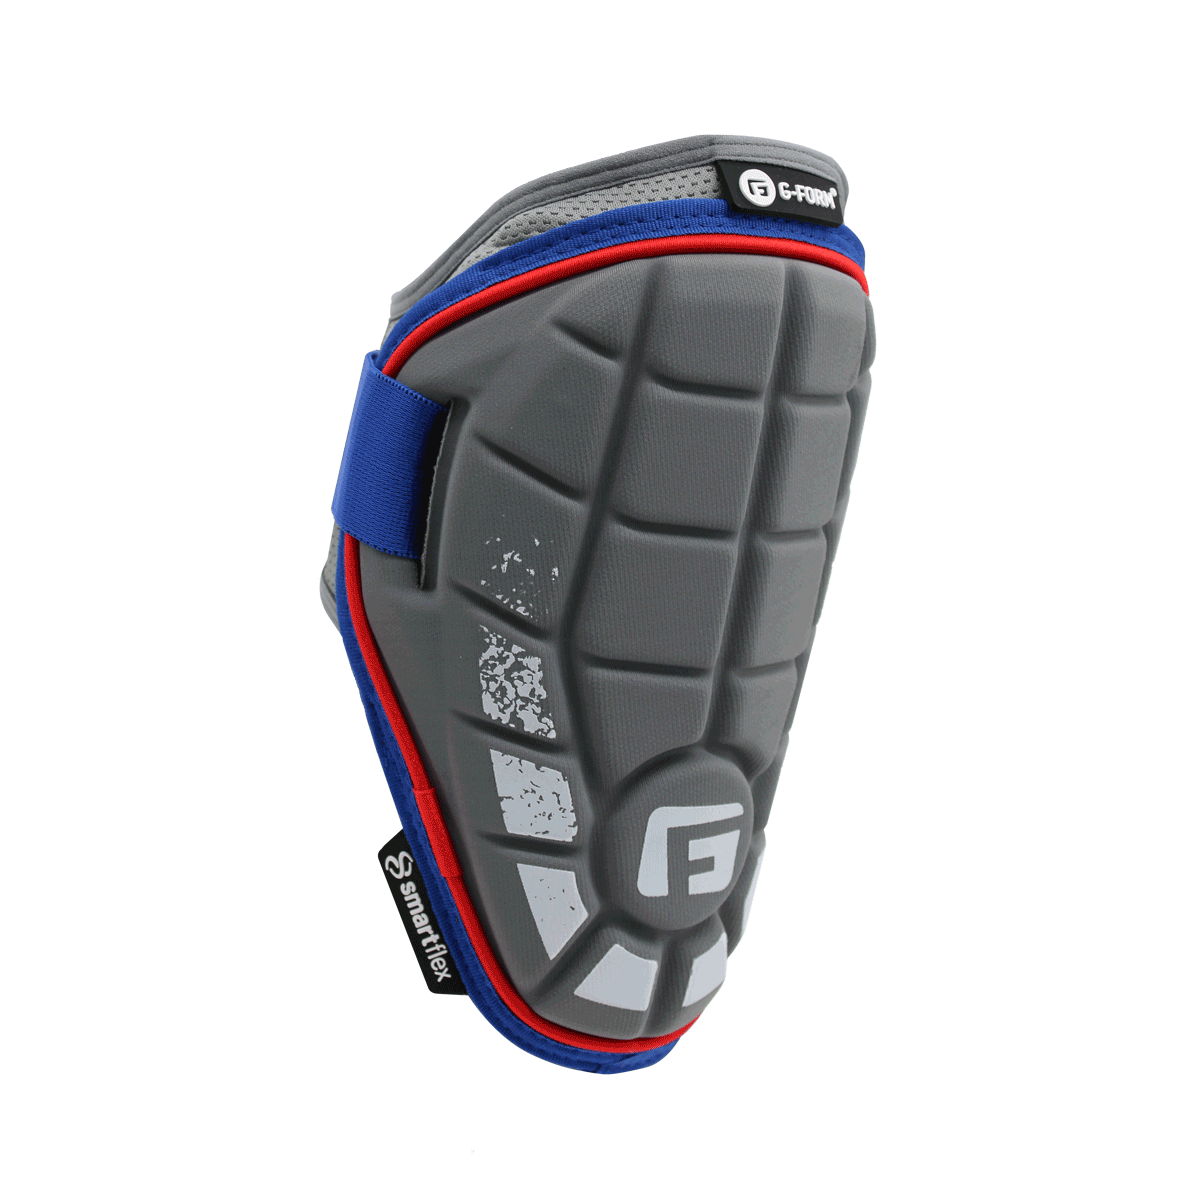 Elite Speed Baseball Elbow Guard - Limited Edition